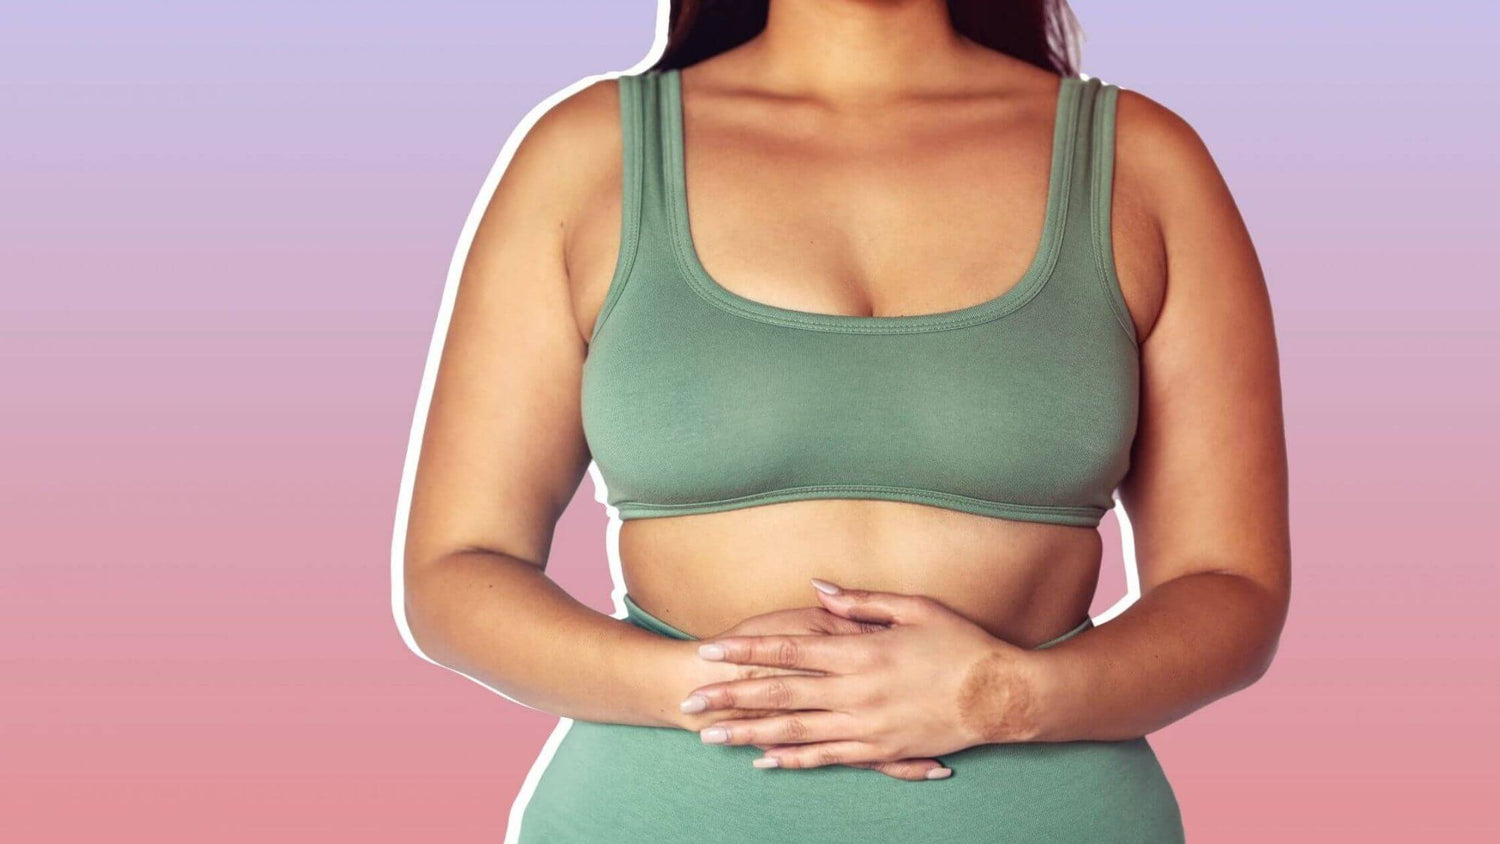 how to stop period bloating naturally and quickly with natural remedies